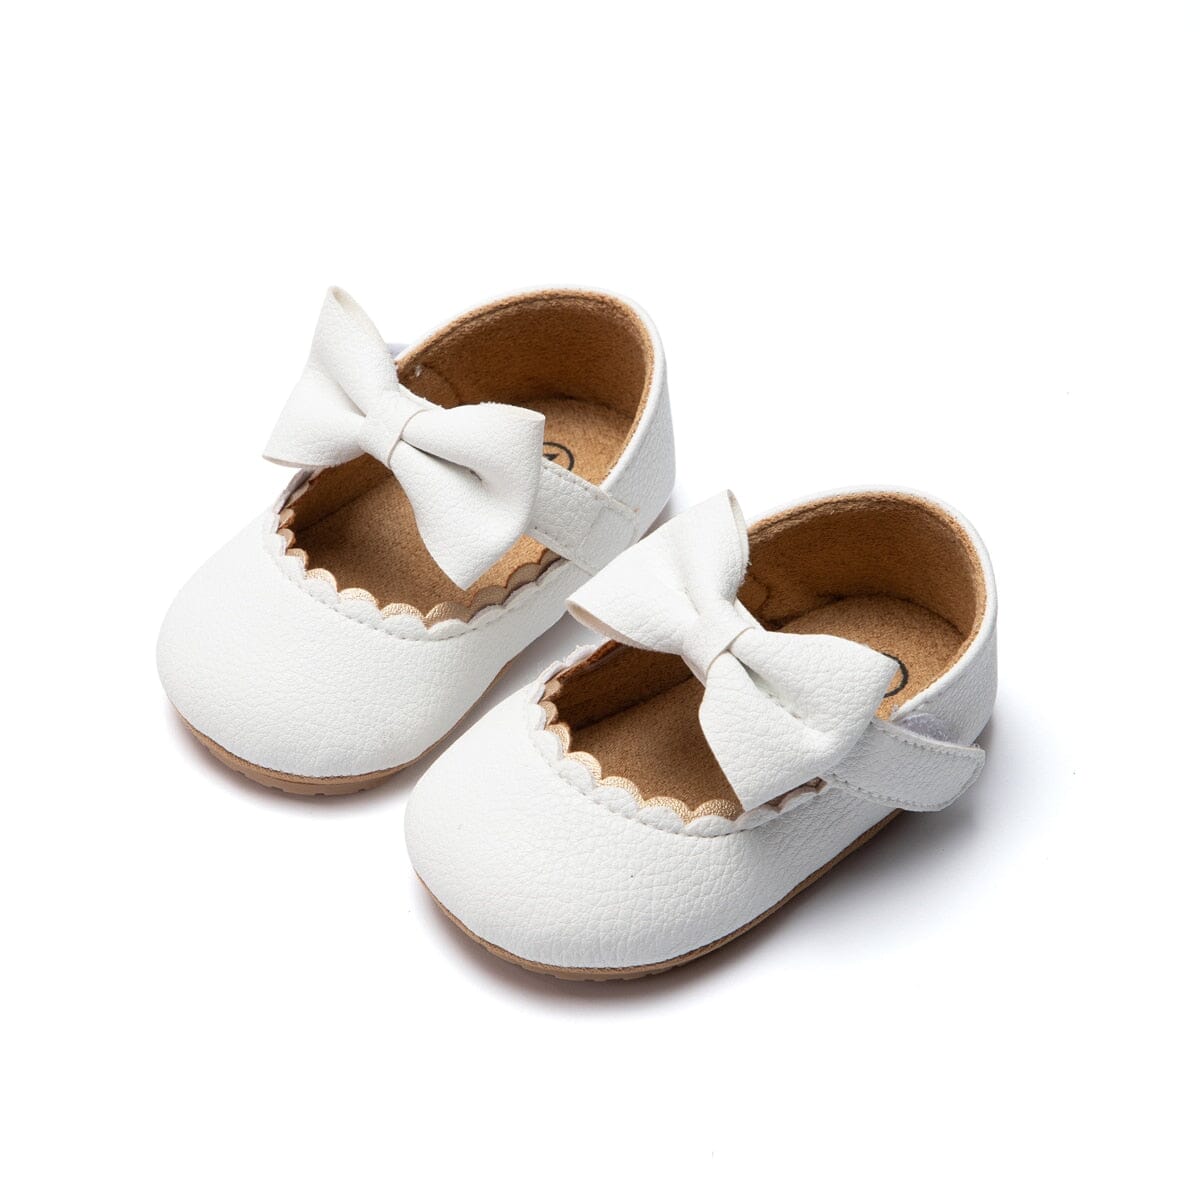 KIDSUN Baby Casual Shoes Infant Toddler Bowknot Non-slip Rubber Soft-Sole Flat PU First Walker Newborn Bow Decor Mary Janes Hilo shop White 0-6 Months 